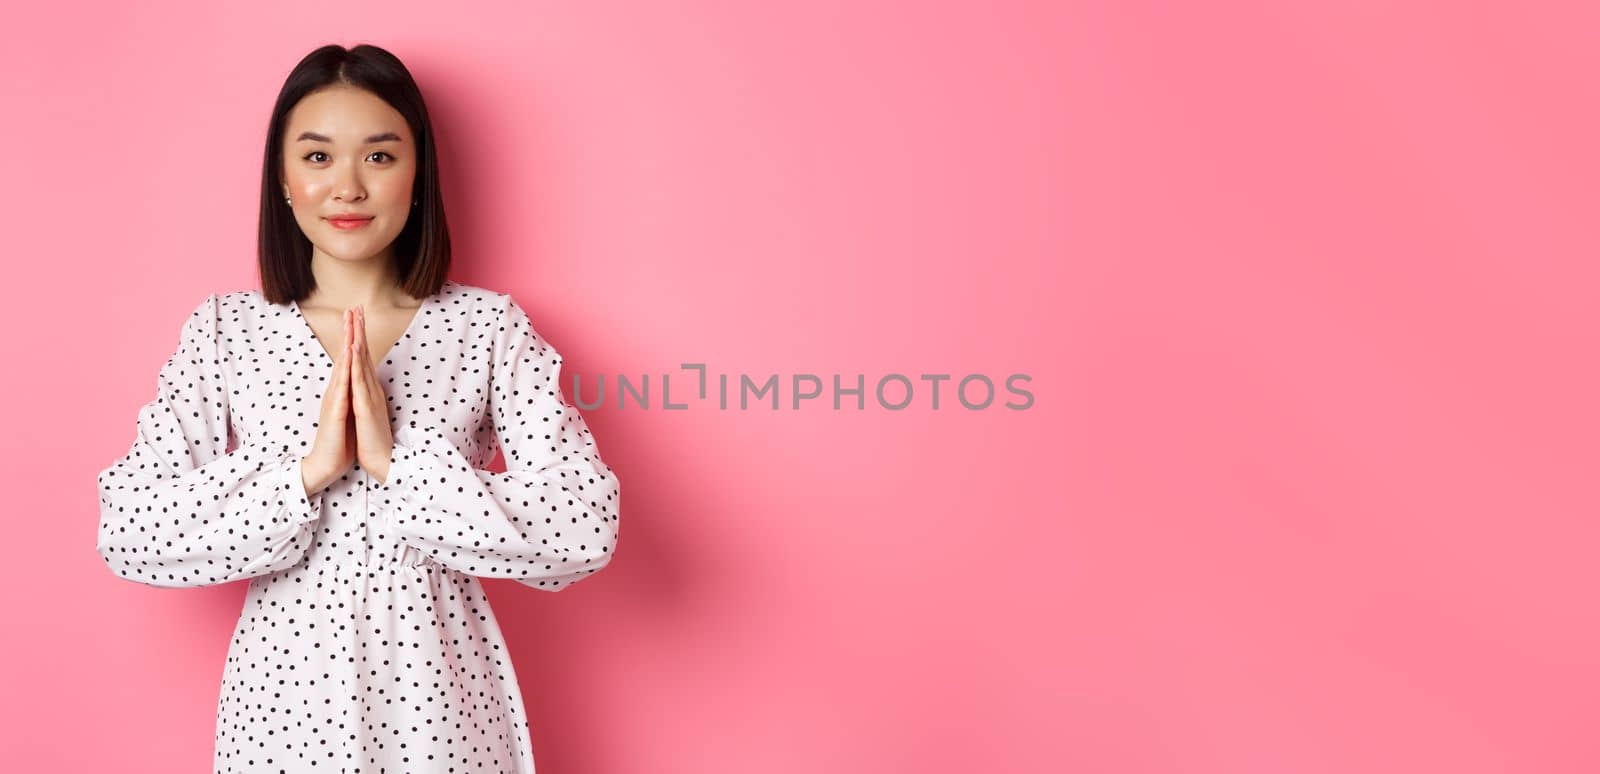 Beautiful asian lady in dress asking for help, holding hands in pray or namaste gesture, thanking you, standing over pink background.